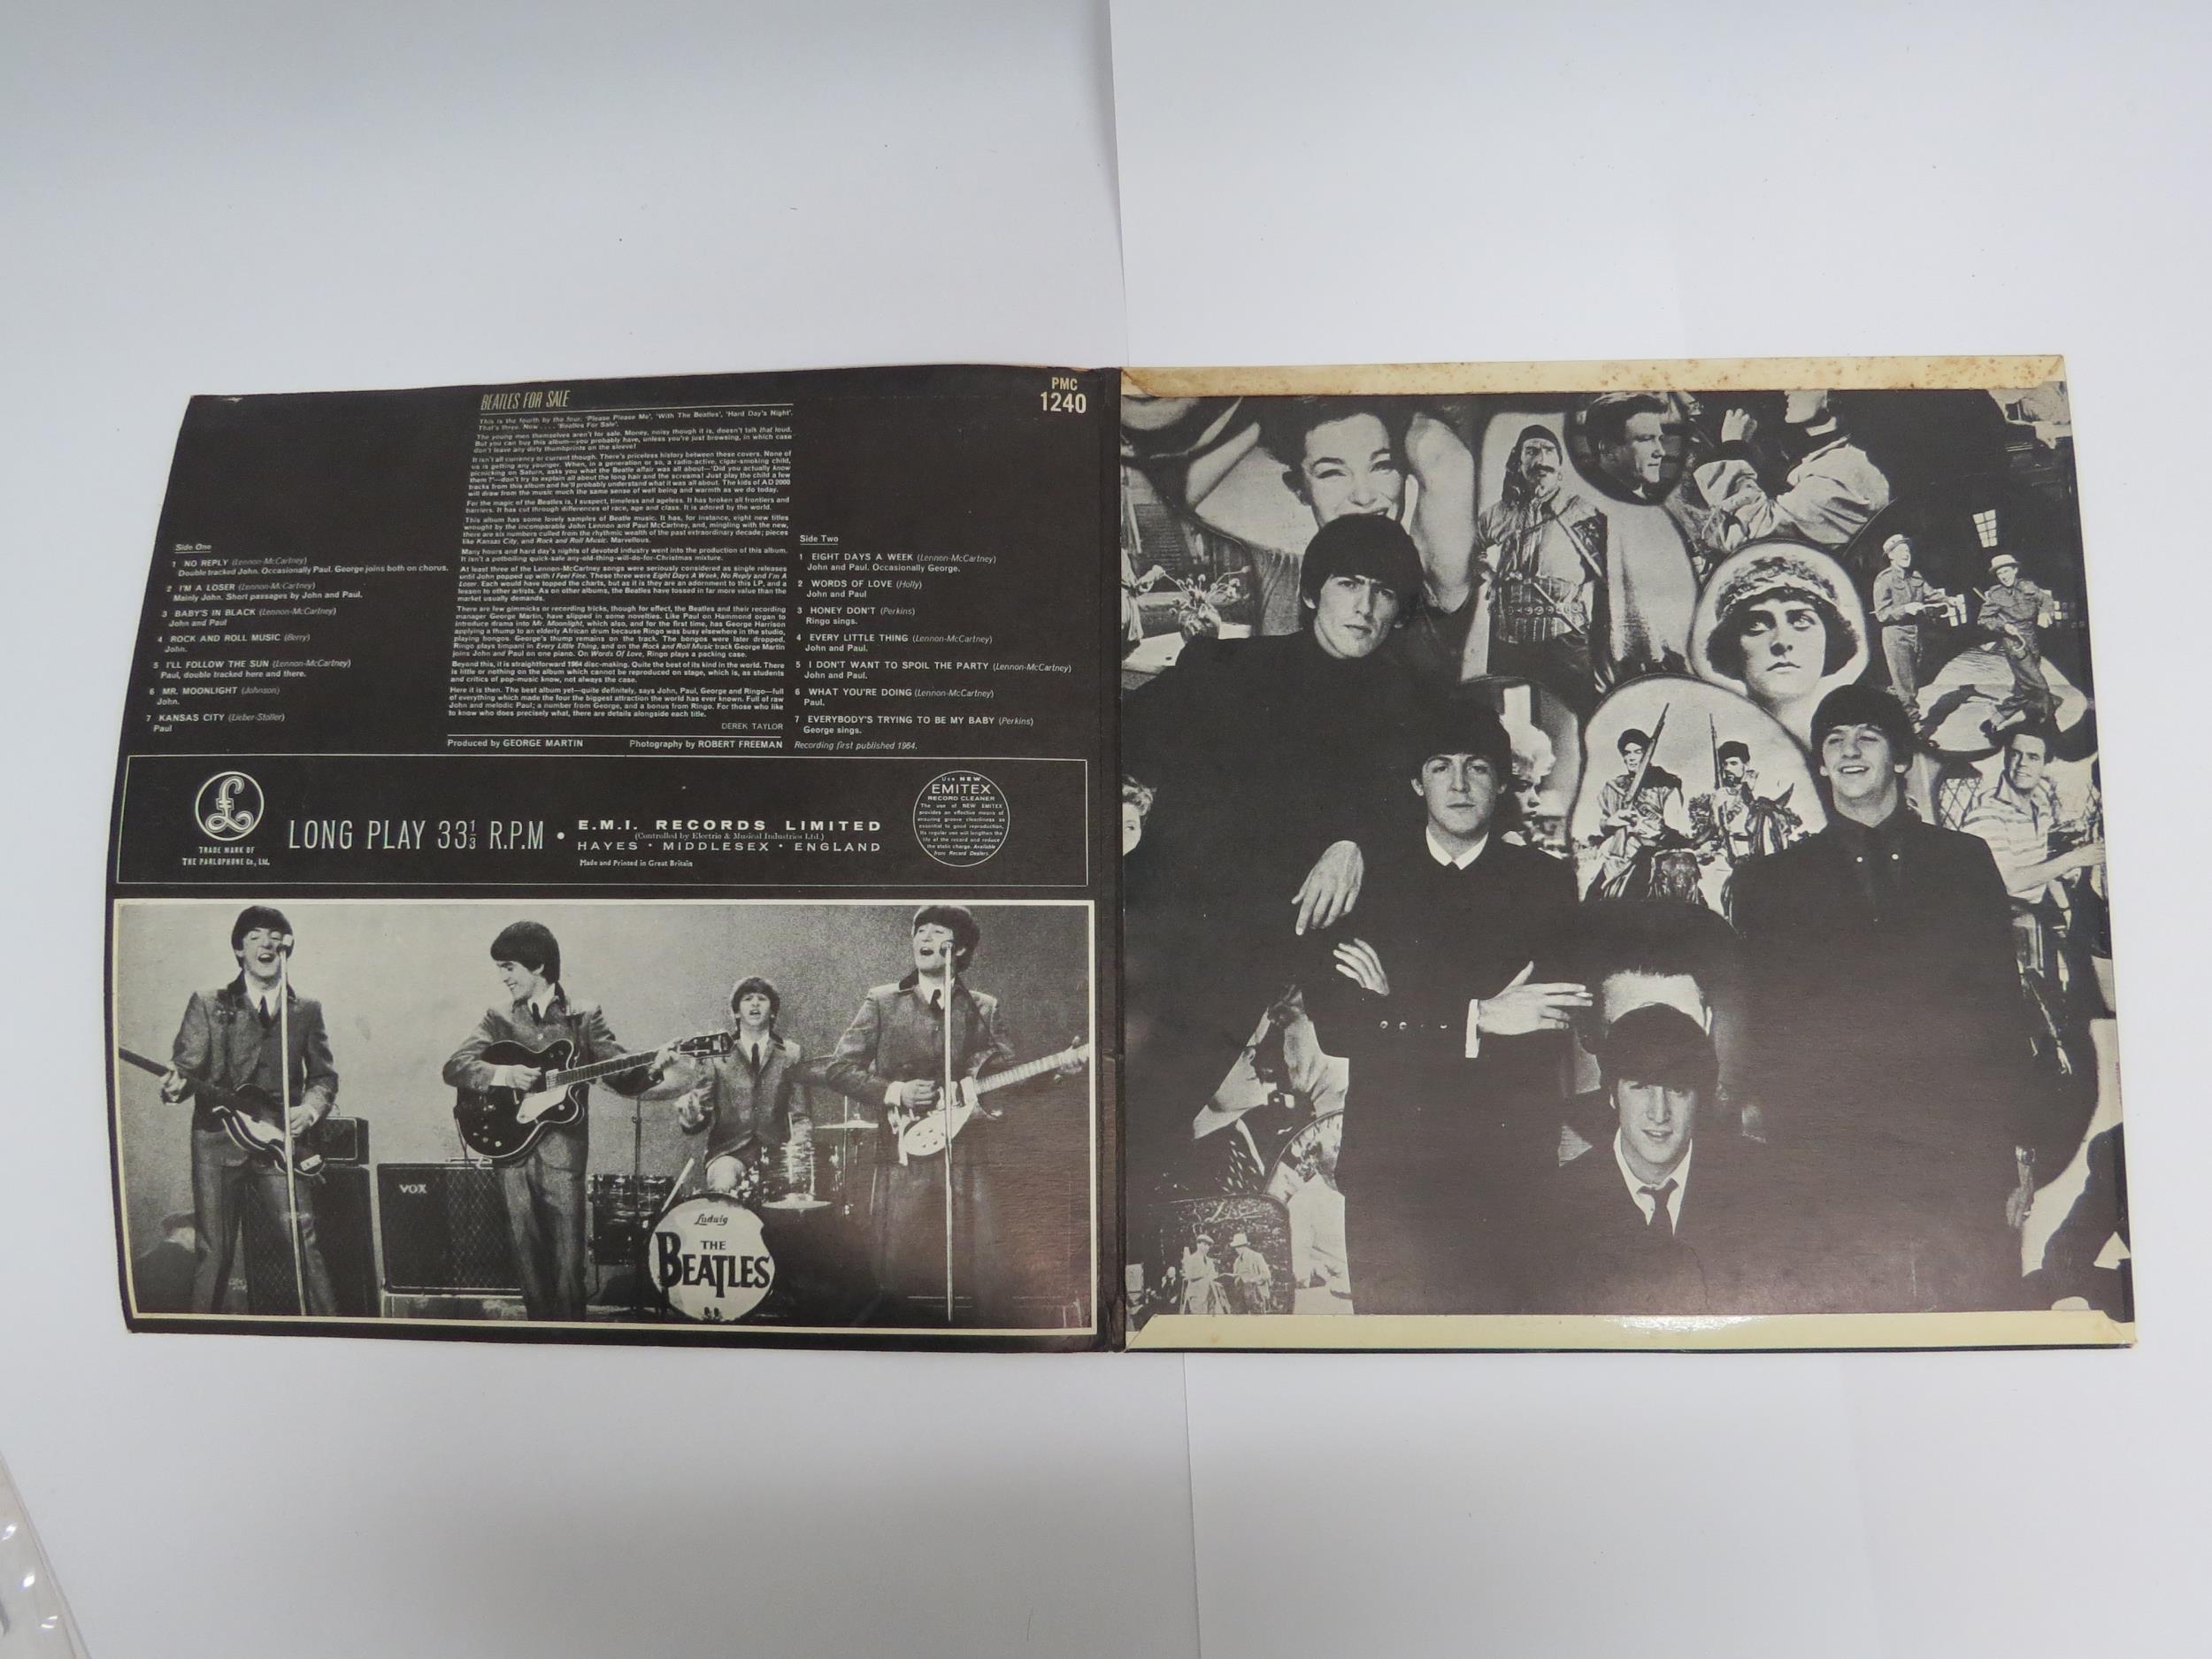 THE BEATLES: 'Beatles For Sale' LP, original UK mono pressing, black and yellow Parlophone labels ( - Image 5 of 6